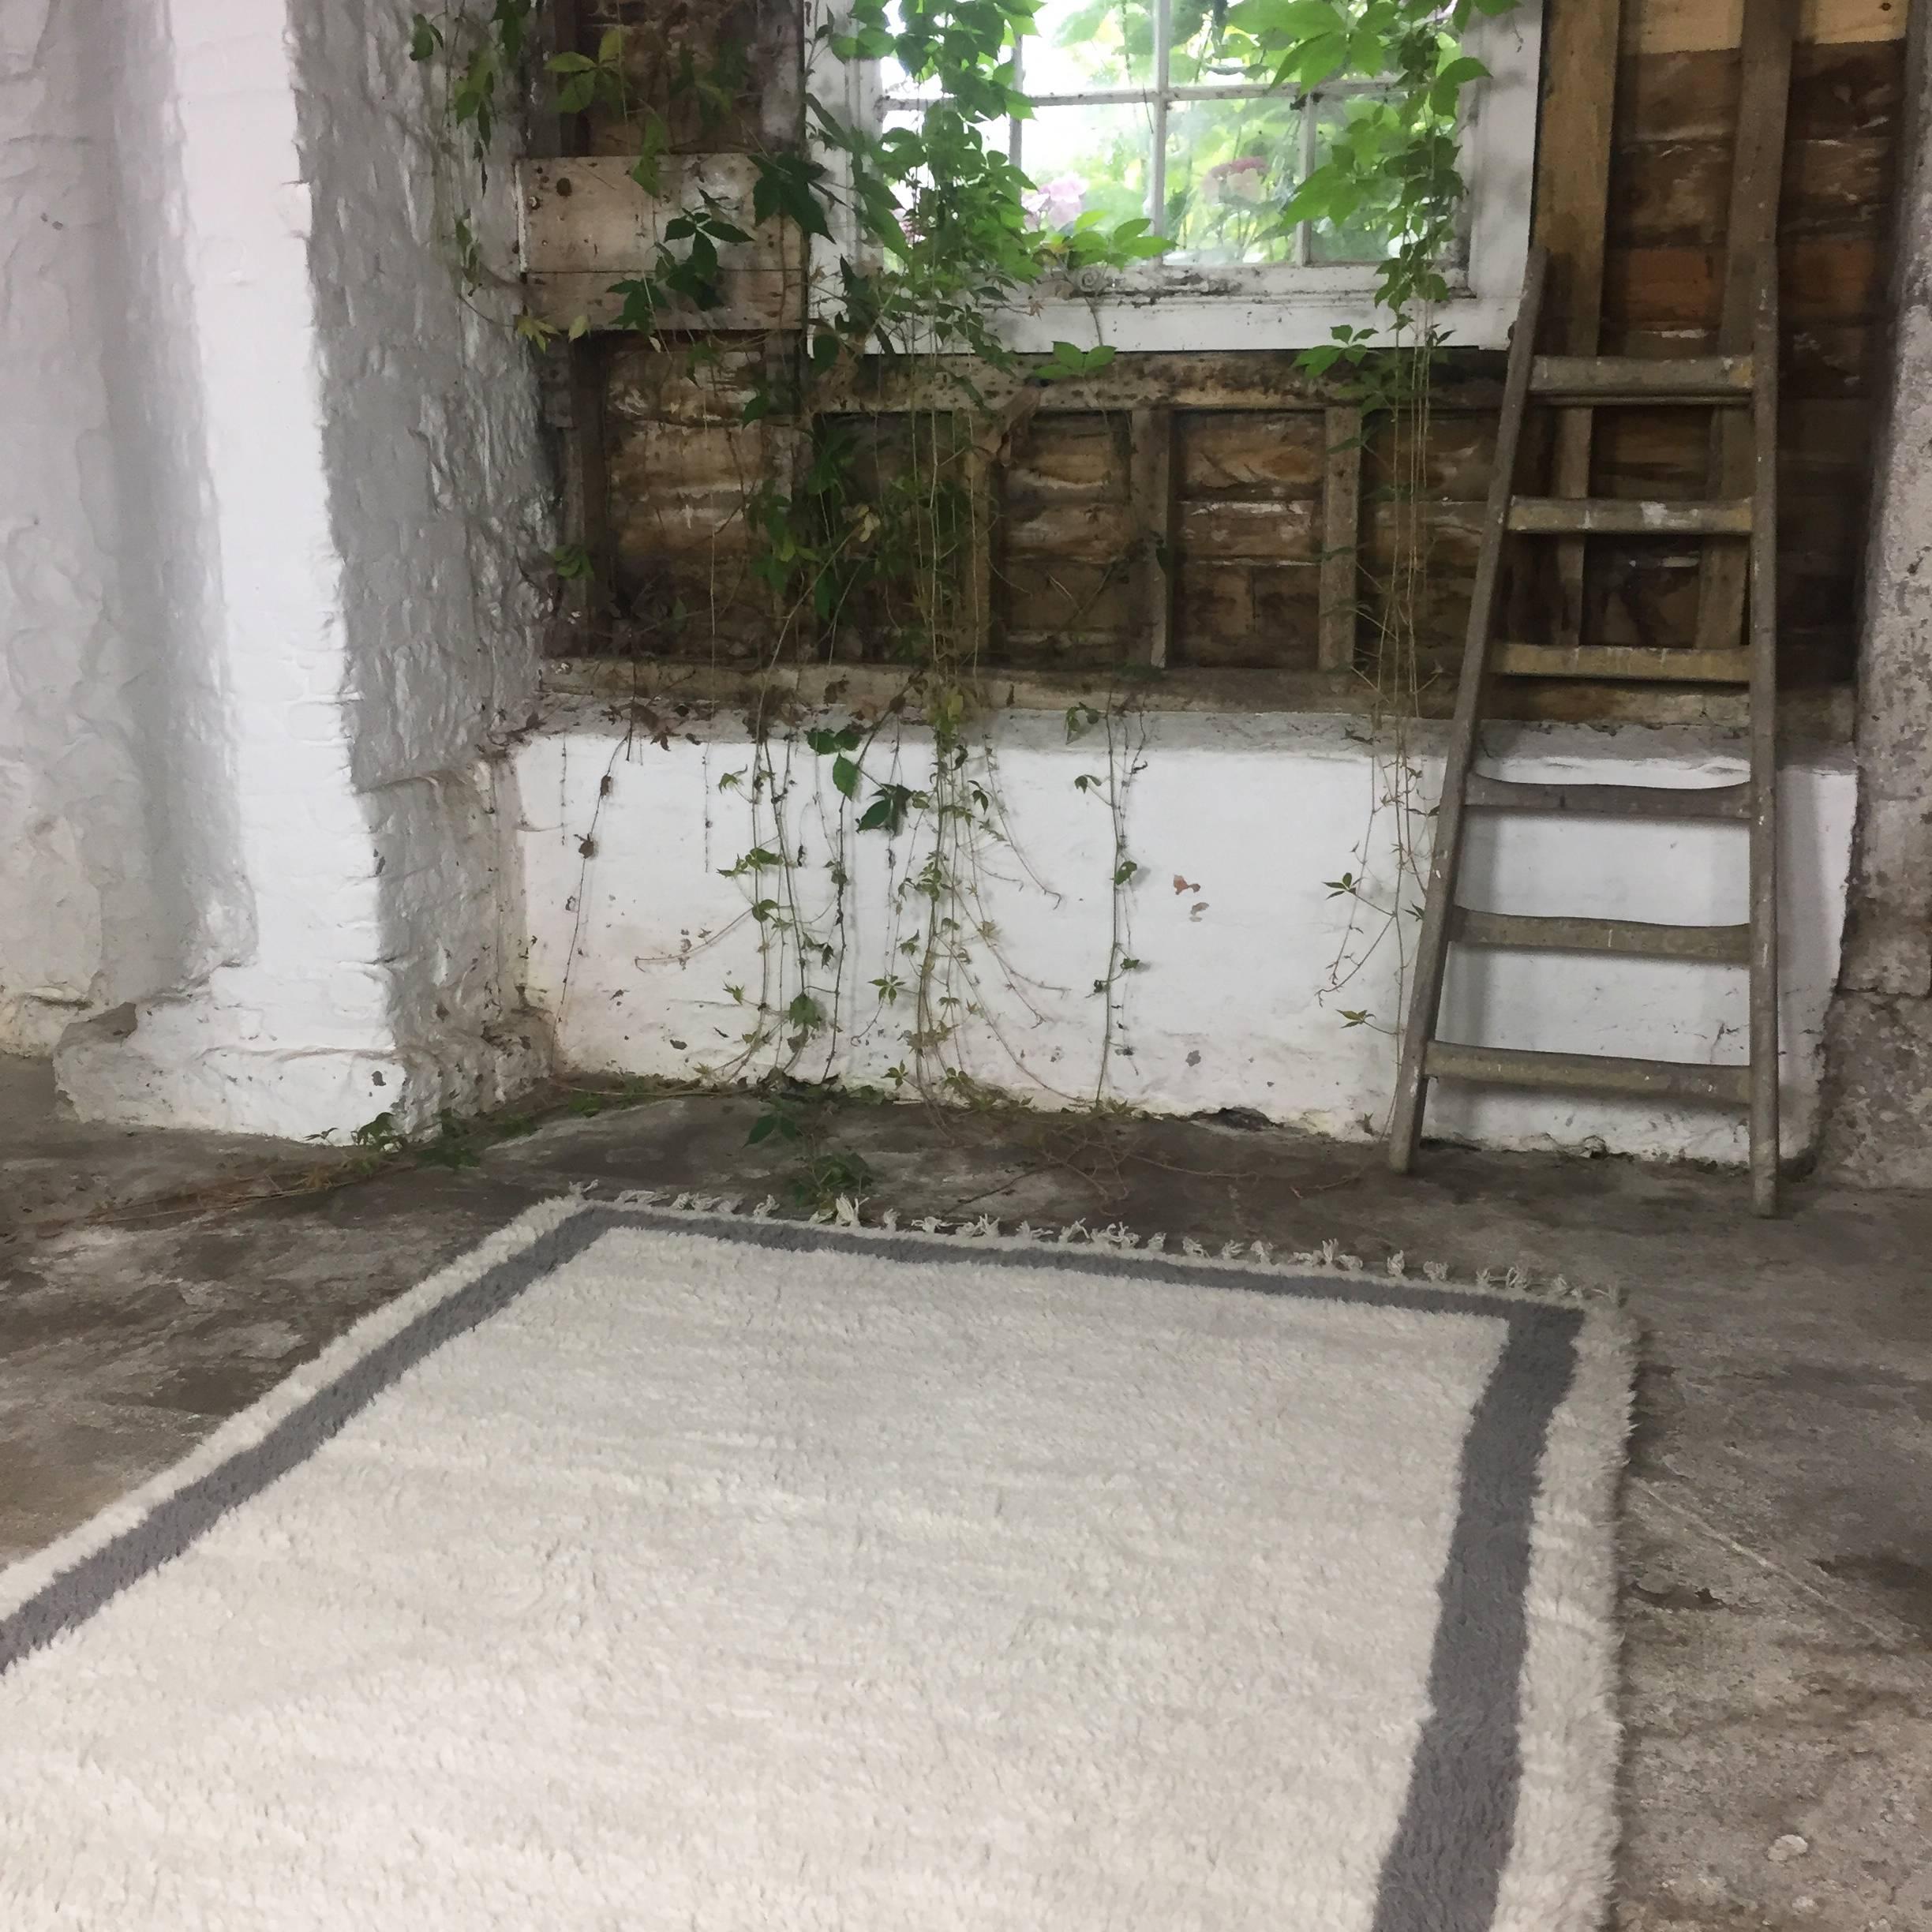 Atlas Ivory and Dark Grey Shaggy Wool Rug In Excellent Condition For Sale In Egerton, Kent